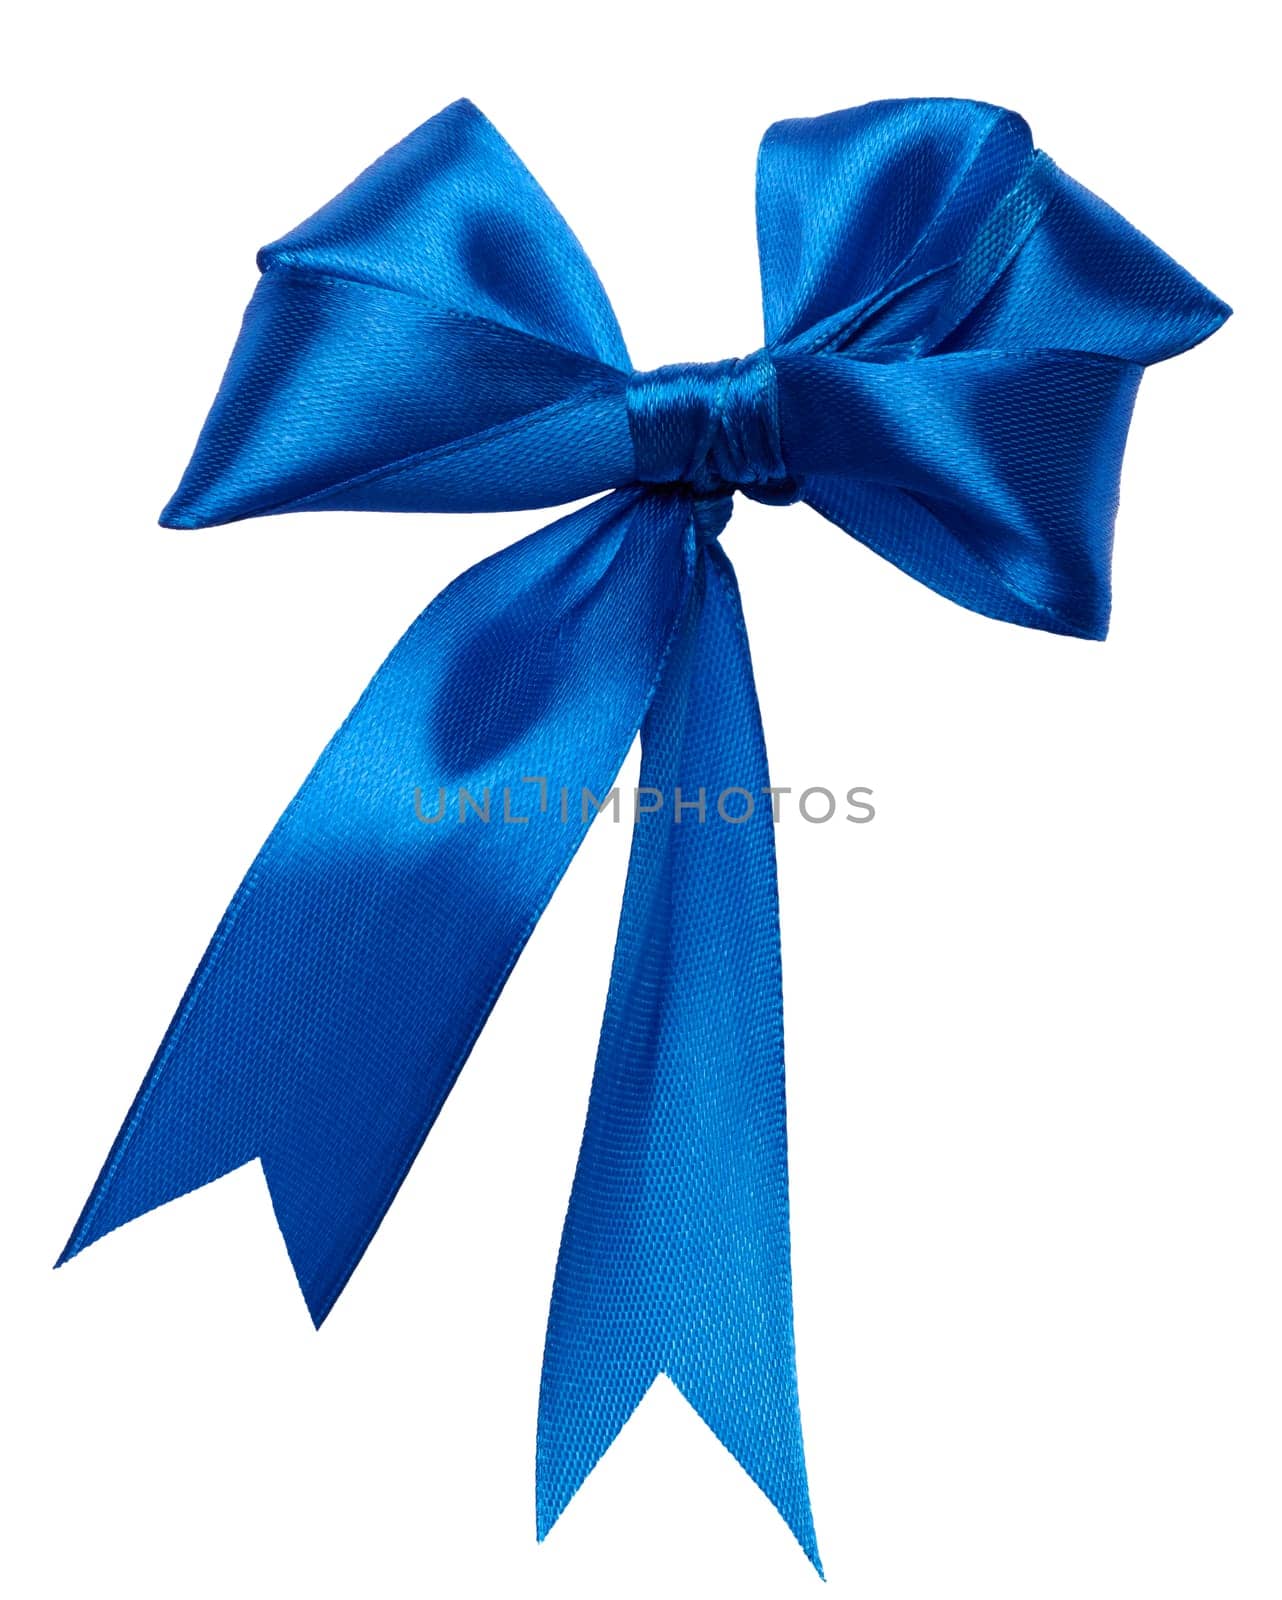 Tied bow made of blue silk ribbon on an isolated background, decor for a gift by ndanko